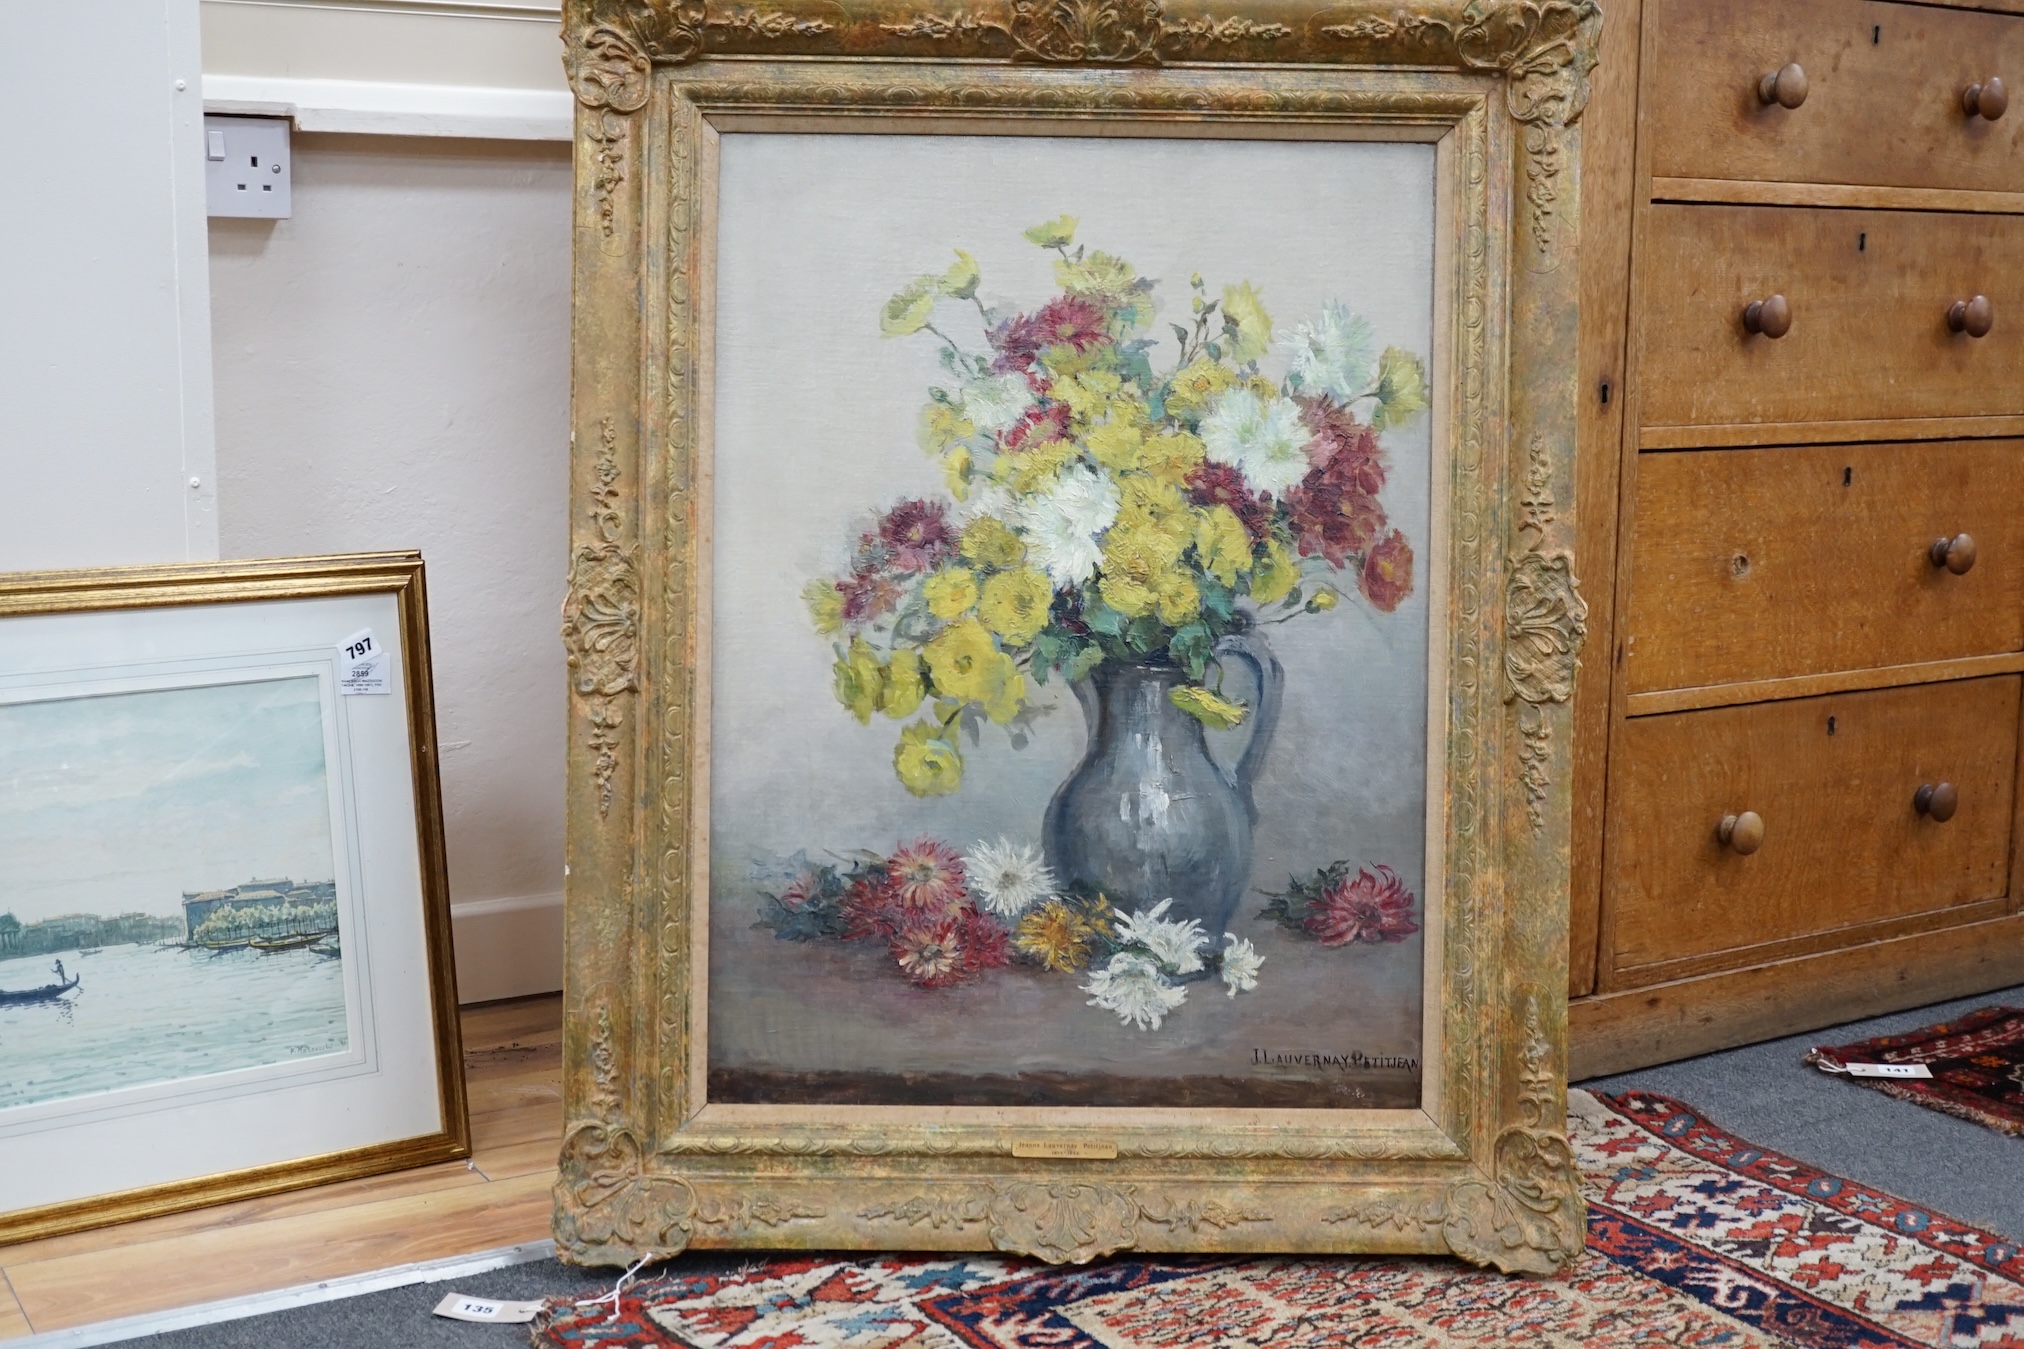 Jeanne Lauvernay-Petitjean (French, 1875-1955), oil on canvas, Still life of flowers in a jug, signed, 71 x 52cm, ornately framed with Richmond Gallery exhibition catalogue. Condition - good